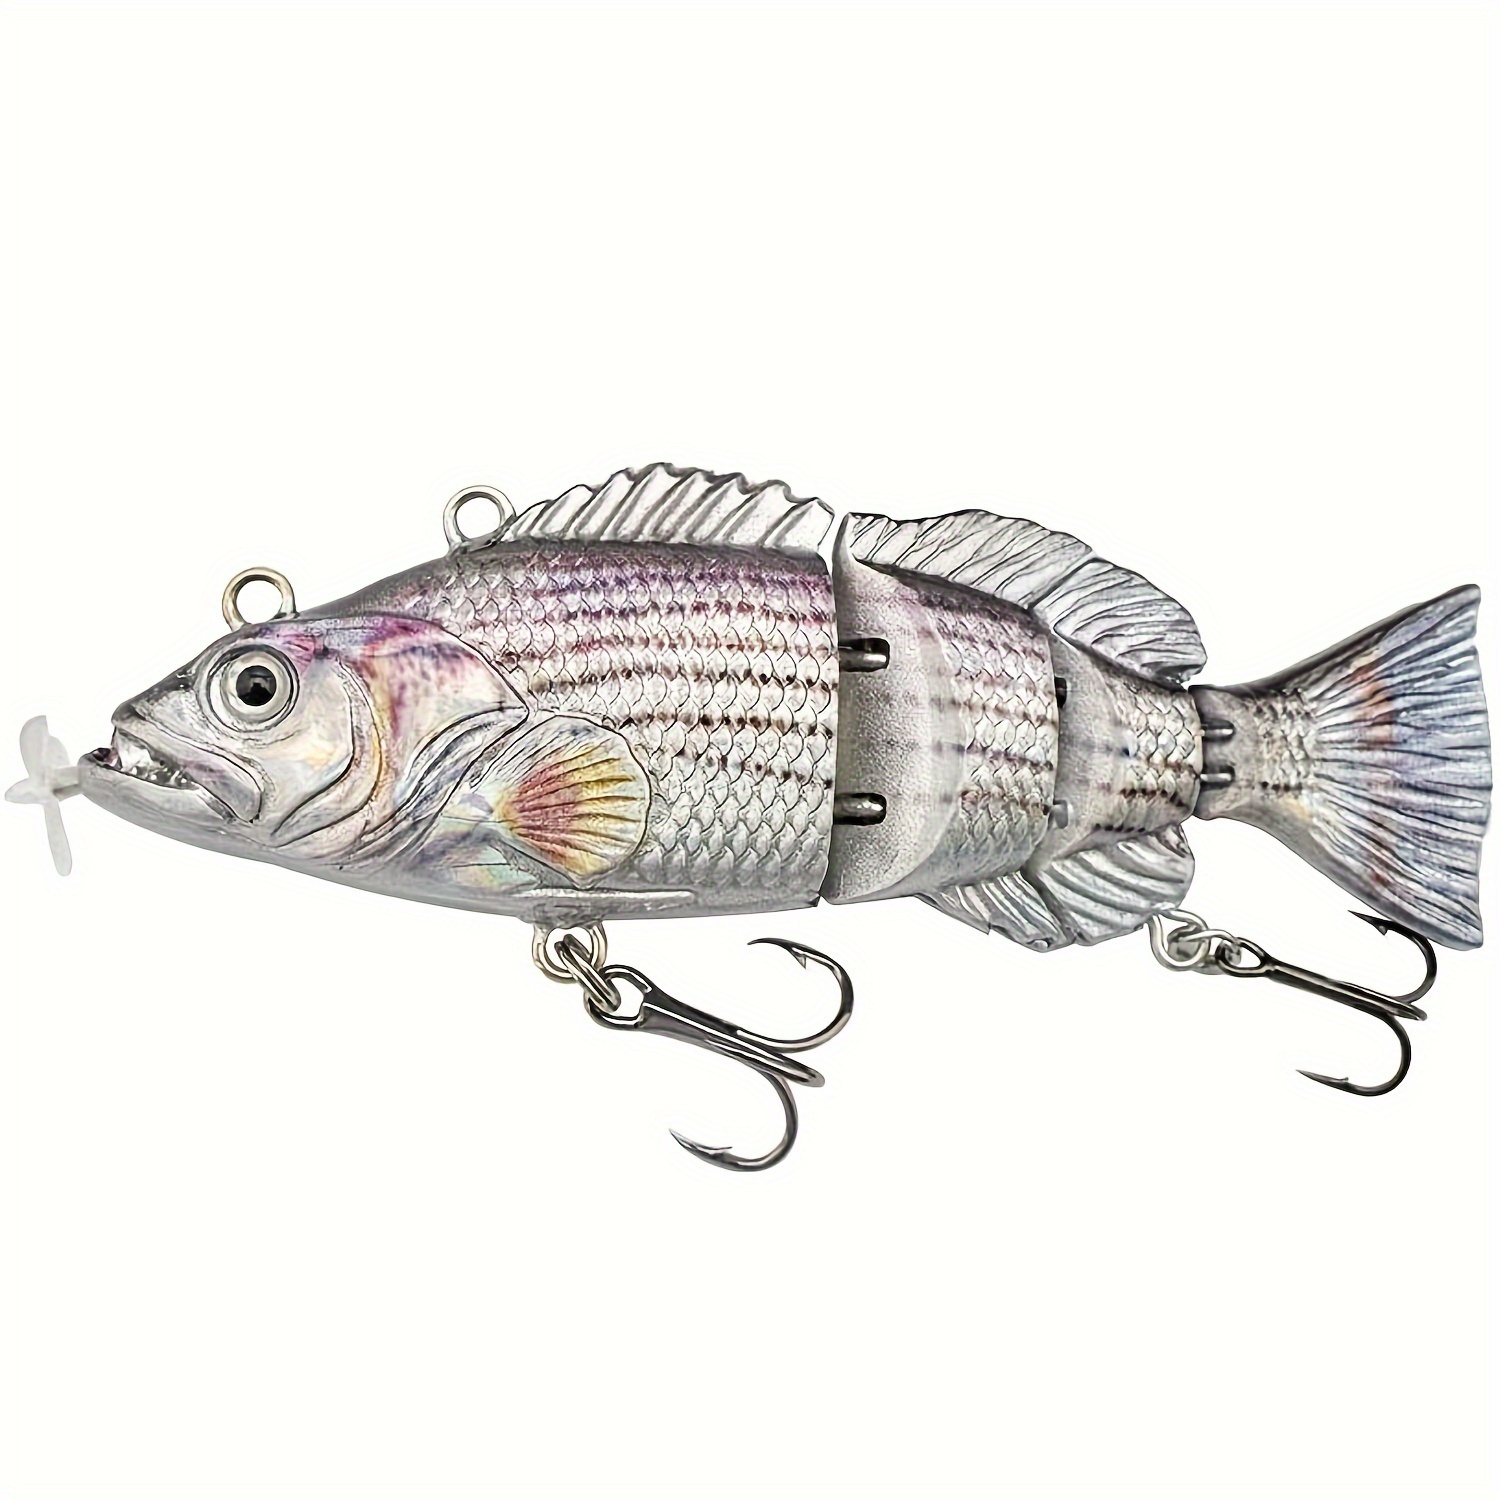 ODS Lure Robotic Swimming Lure USB Rechargeable LED Light 4-Segement Multi Jointed Swimbait Electric Bait Fishing Tackle